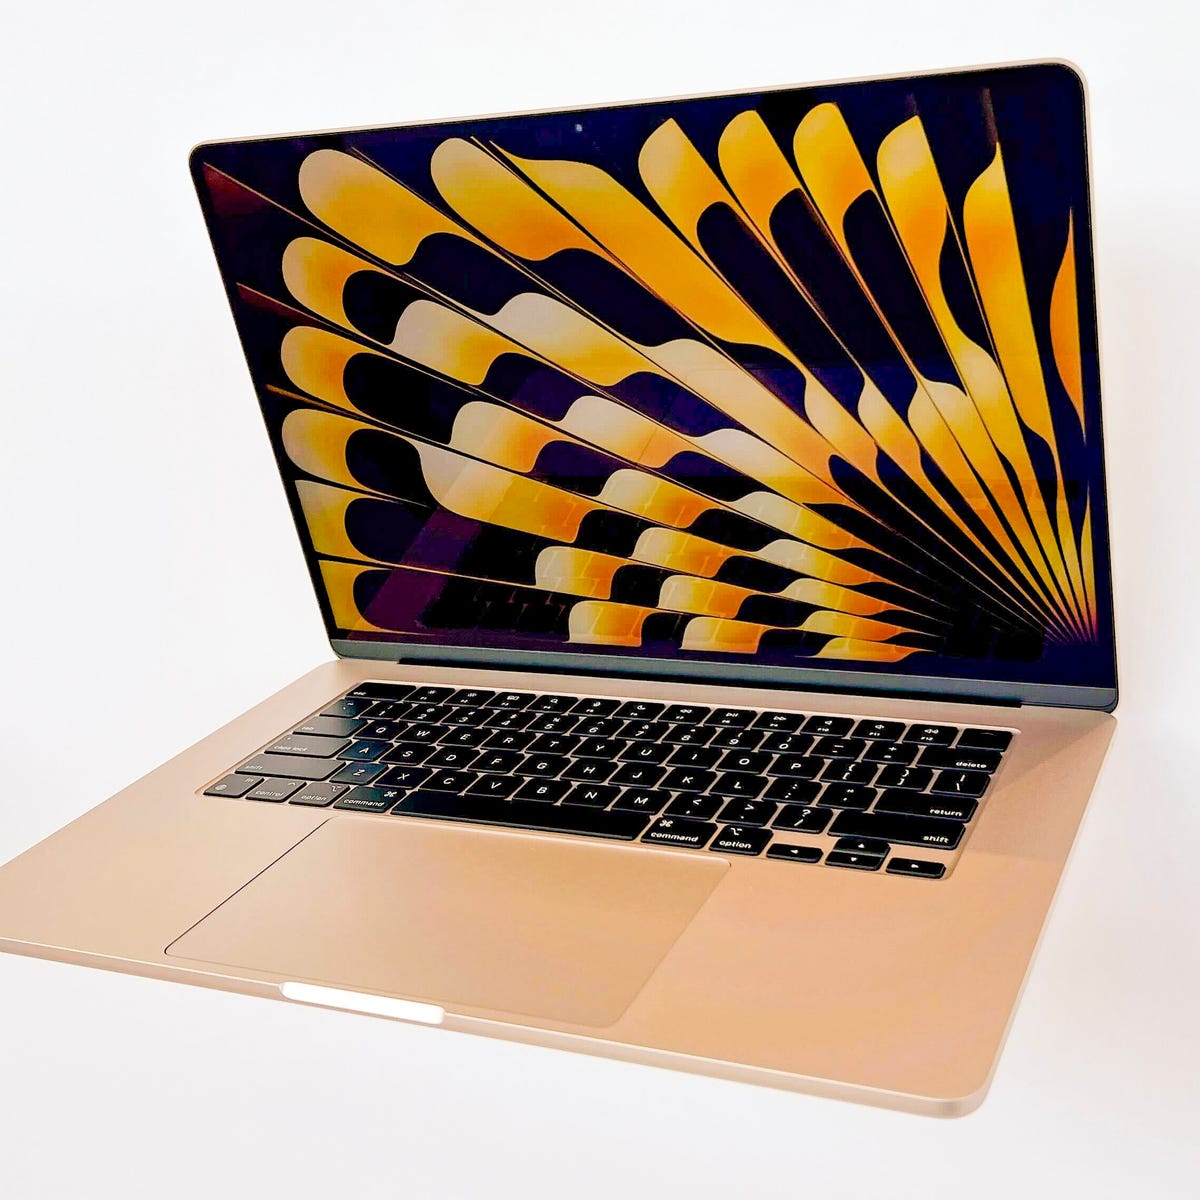 MacBook Air 15-Inch: Apple Just Announced Its Biggest Air Ever - CNET